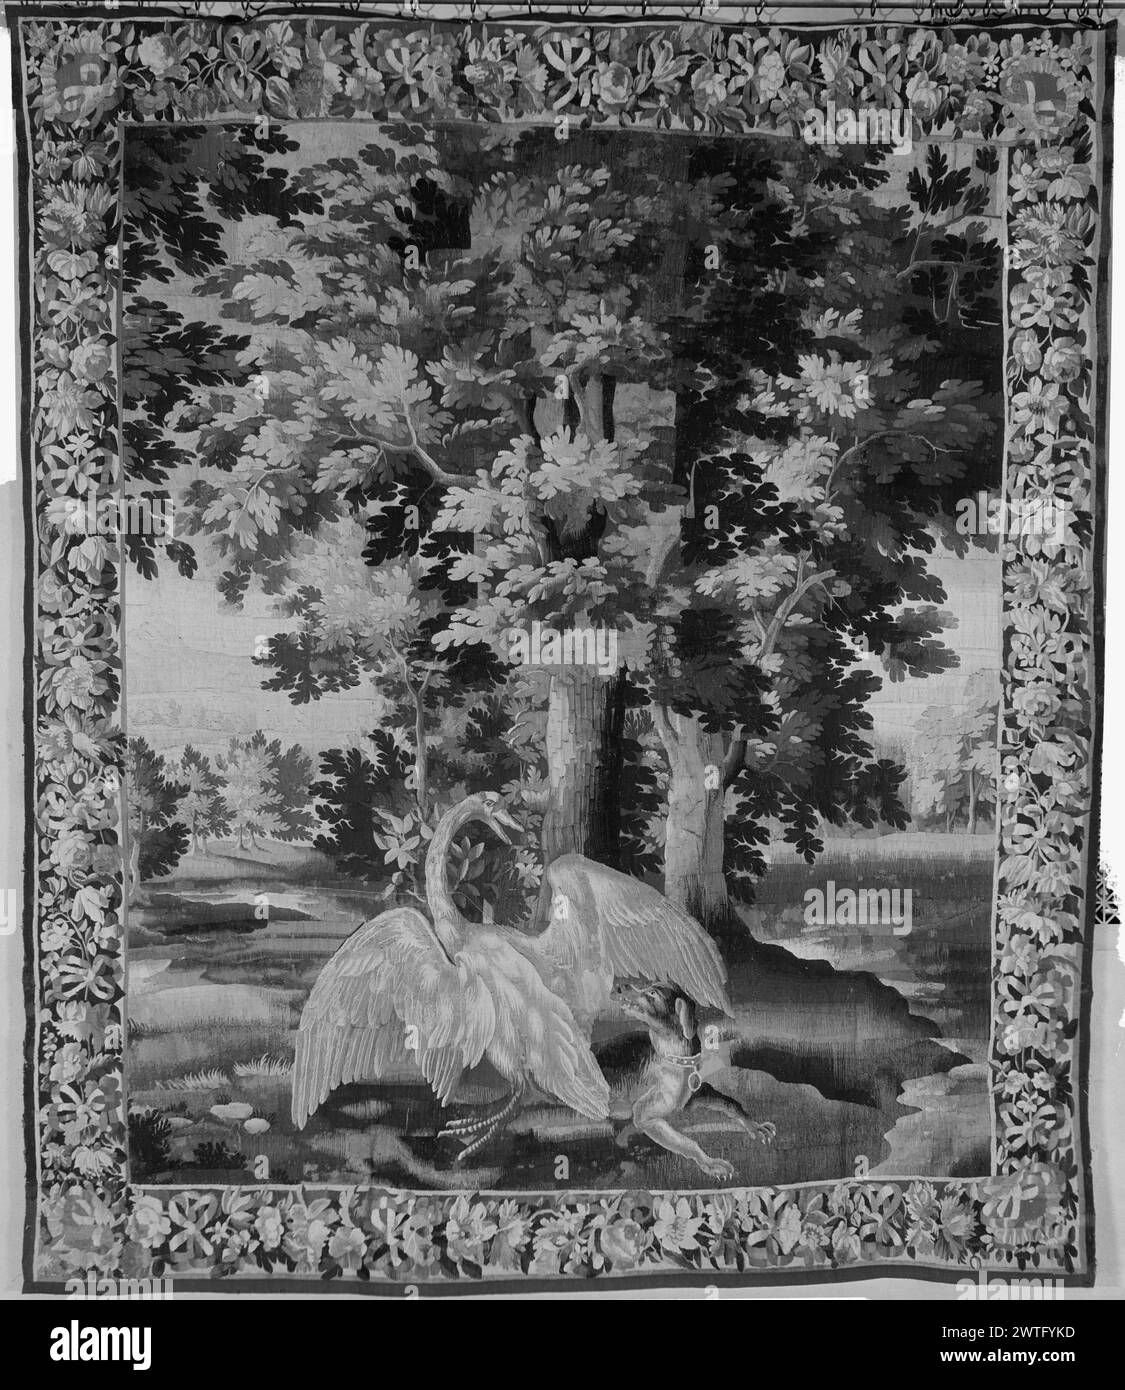 Landscape with swan and dog. unknown c. 1700-1750 Tapestry Dimensions: H 9'3' x W 8' Tapestry Materials/Techniques: unknown Culture: Flemish Weaving Center: unknown Ownership History: French & Co. purchased from Myron C. Taylor, received 11/19/1941; sold to Rivas Eyzaguirre & Co. 3/12/1953. Stock Photo